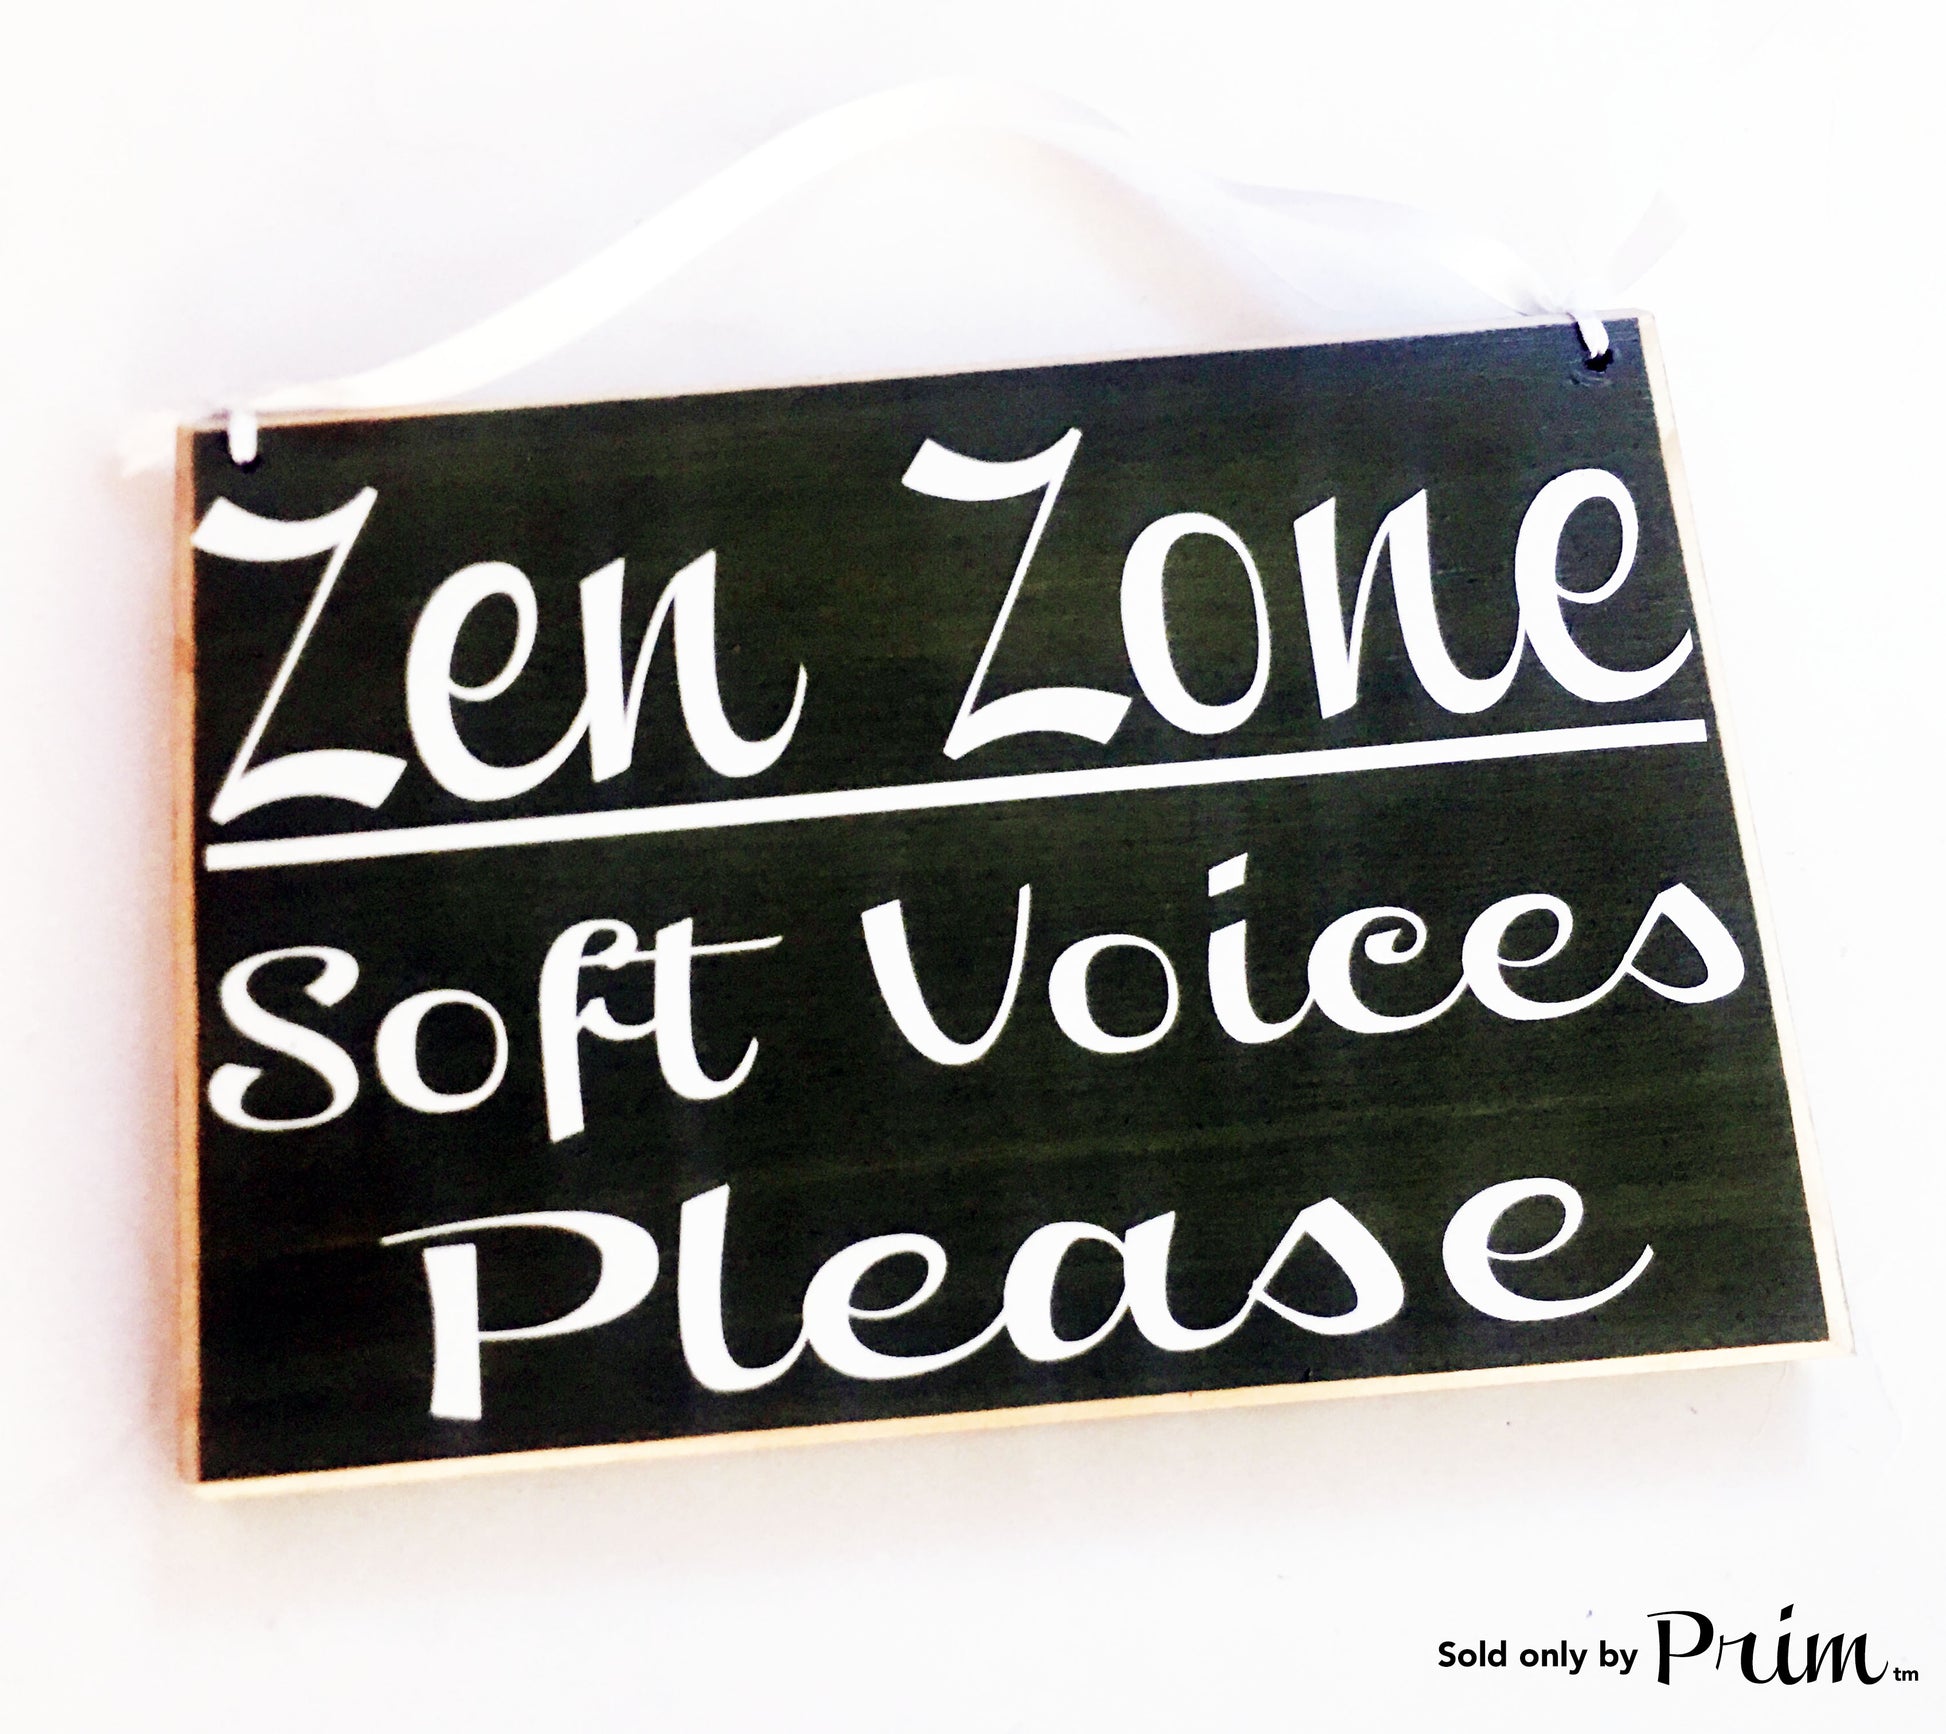 8x6 Zen Zone Soft Voices Please Custom Wood Sign Please Do Not Disturb Yoga Meditating Meditation In Session In A Meeting Conference Custom Door Plaque